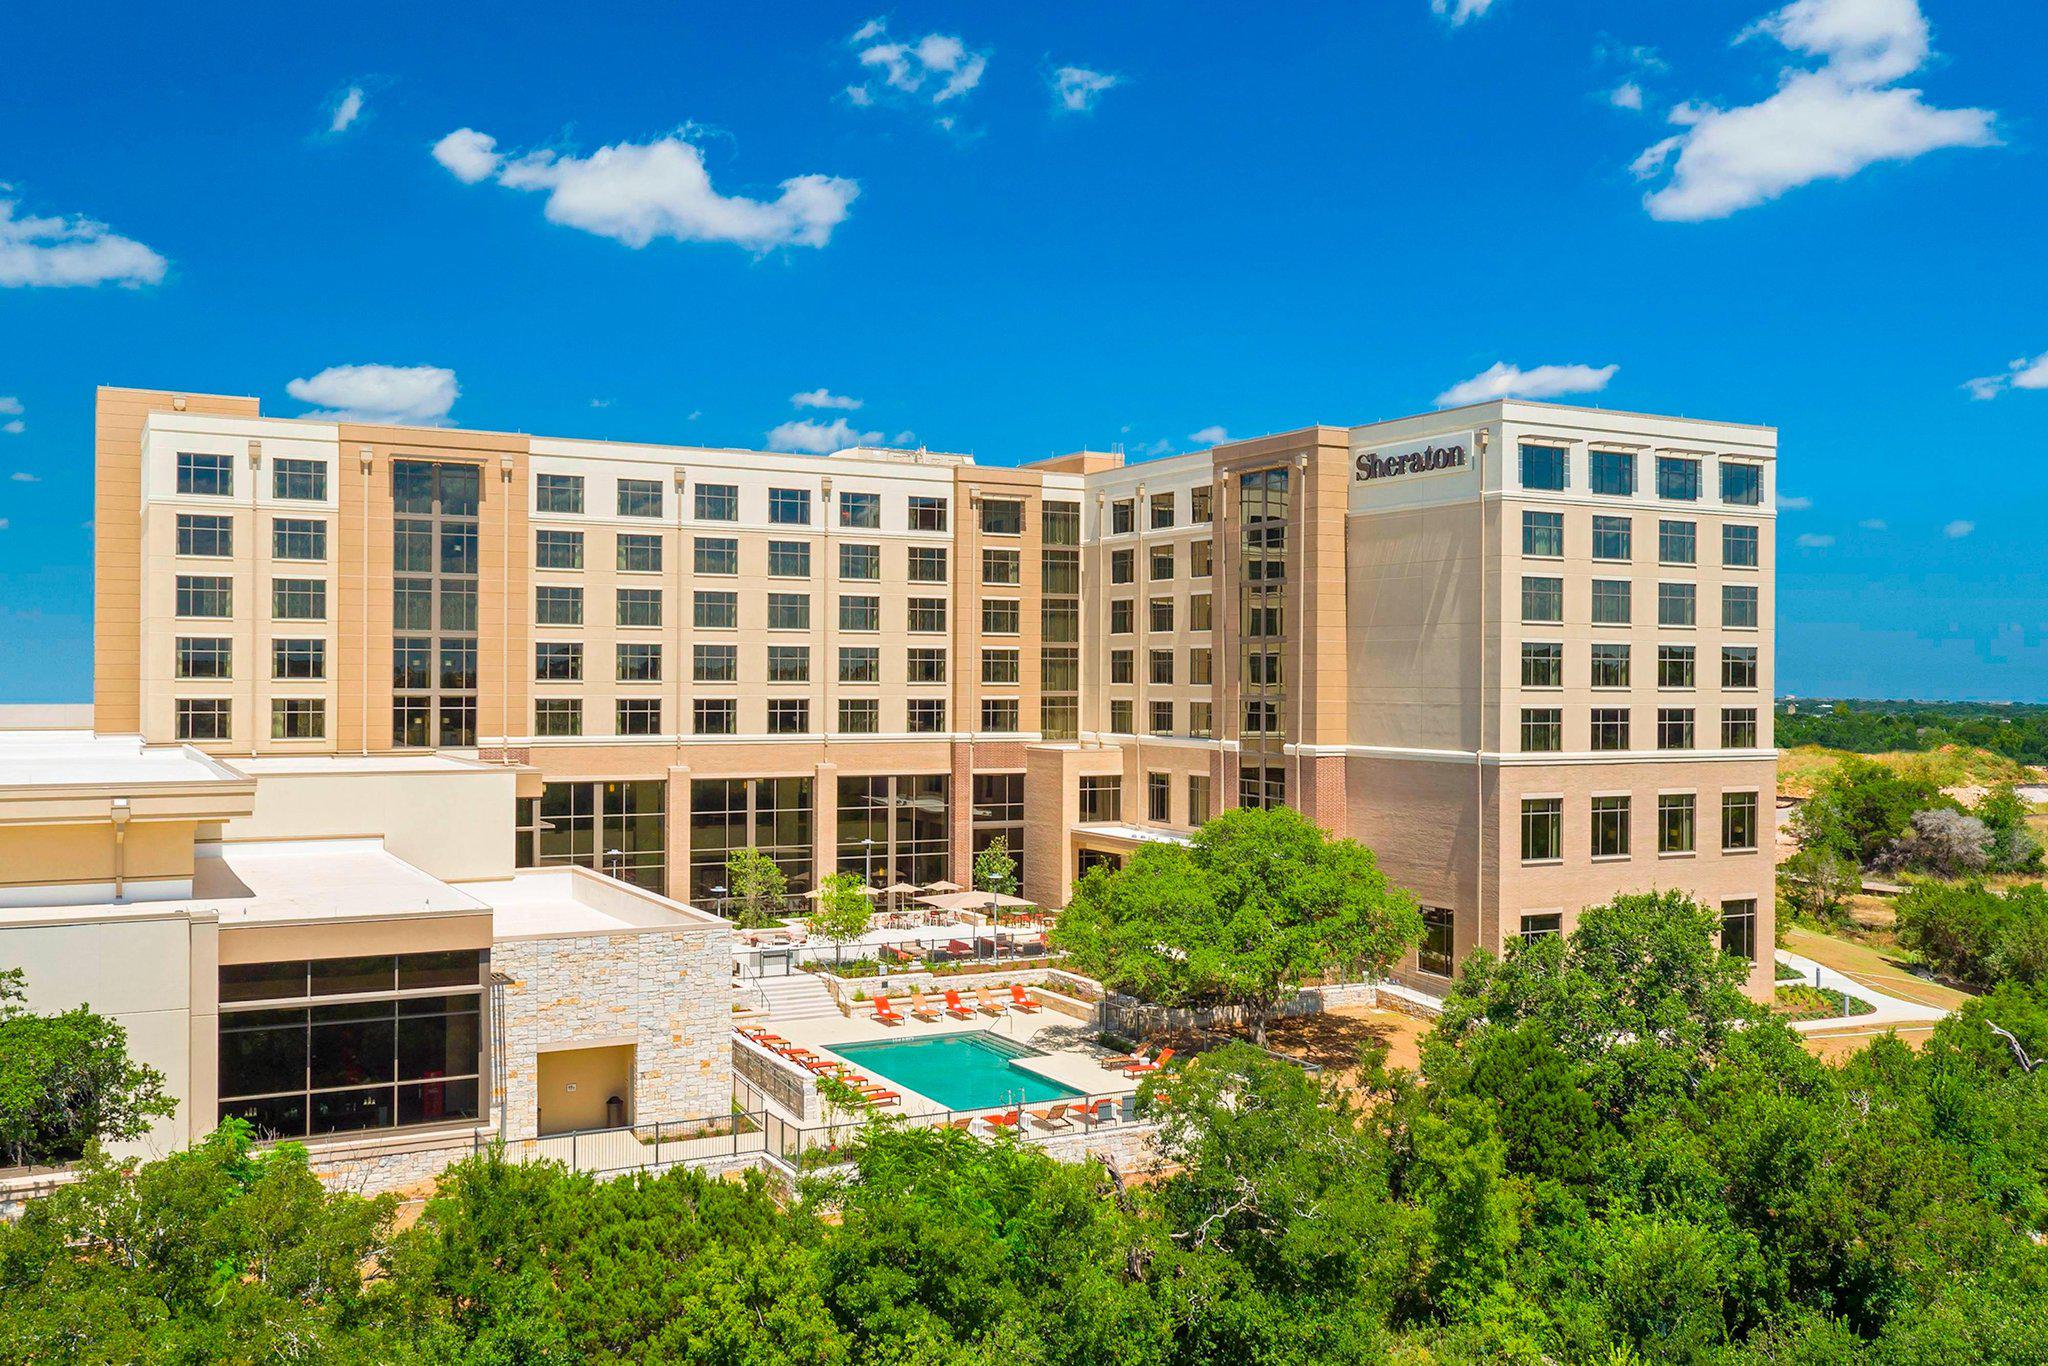 Sheraton Austin Georgetown Hotel & Conference Center Photo